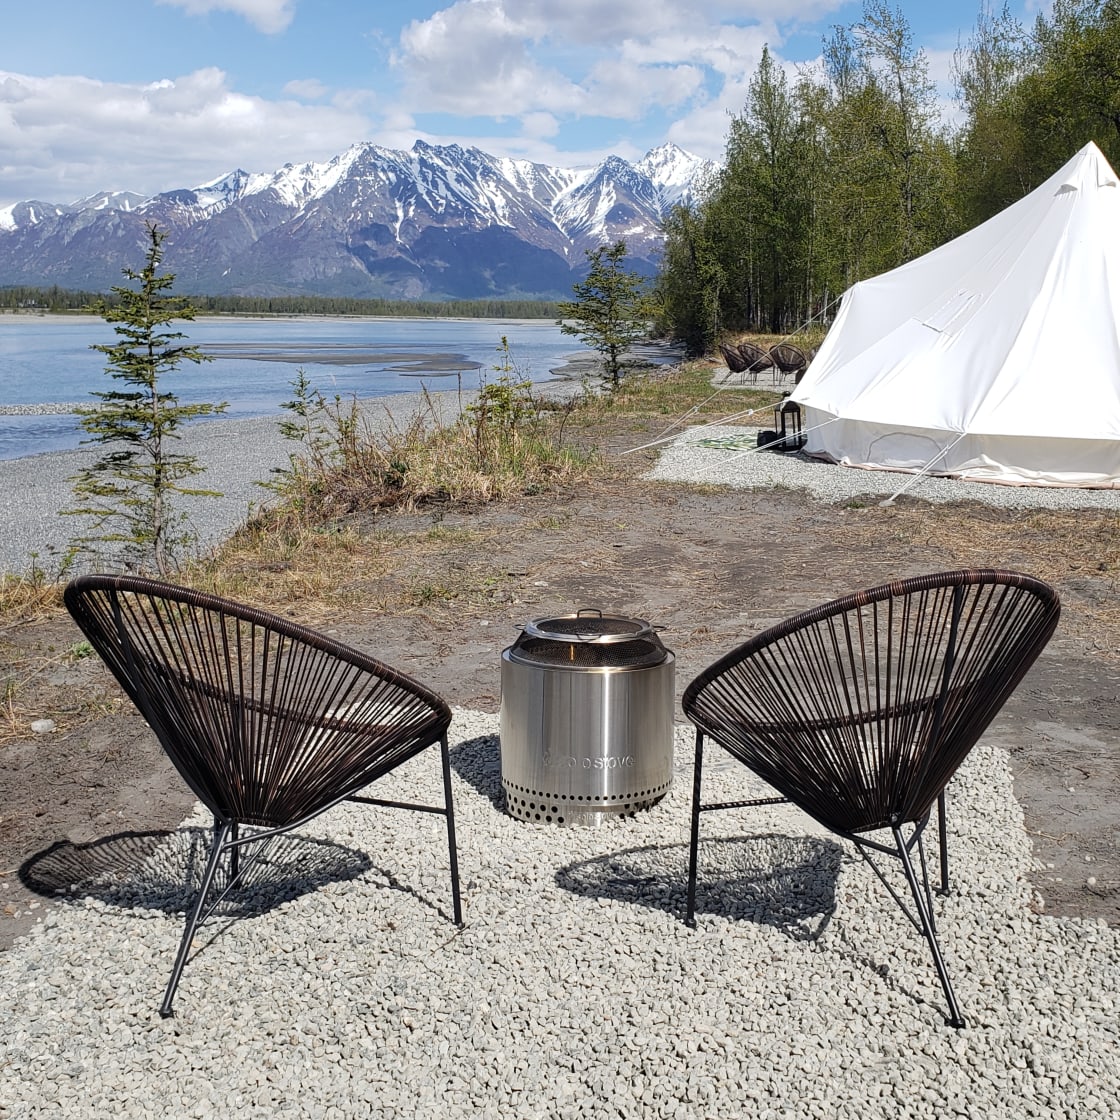 Each tent comes with its own Solo Stove, seating for two and incredible views!